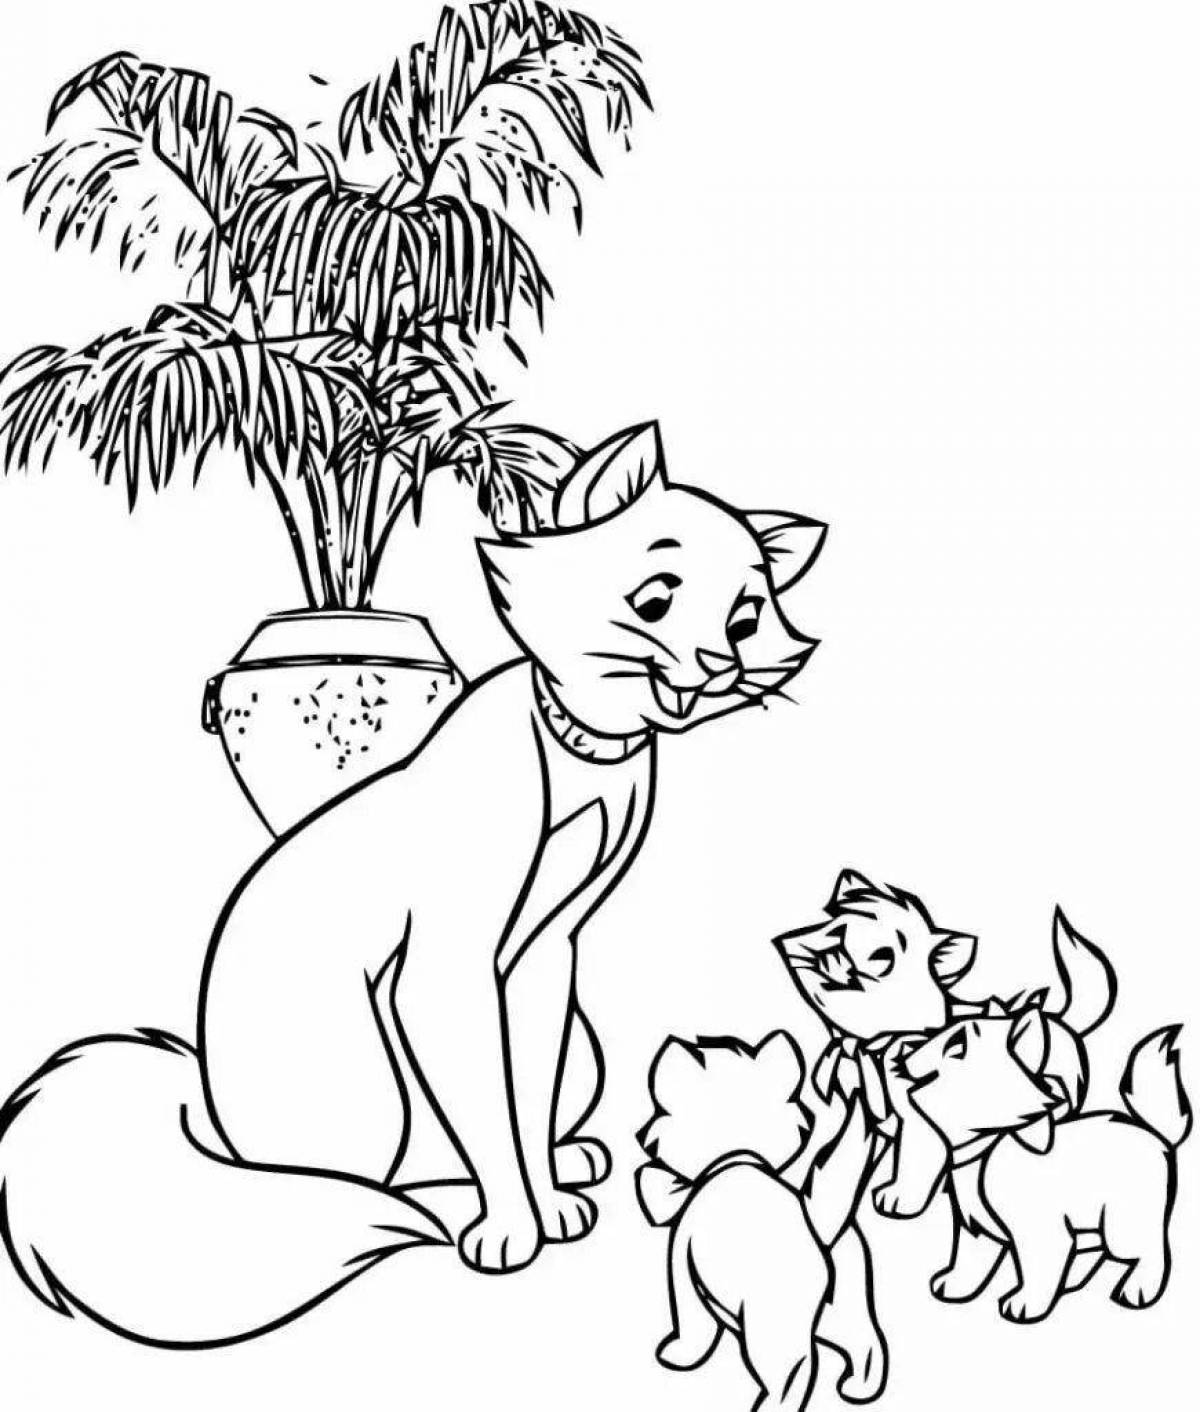 Coloring page elegant mother cat